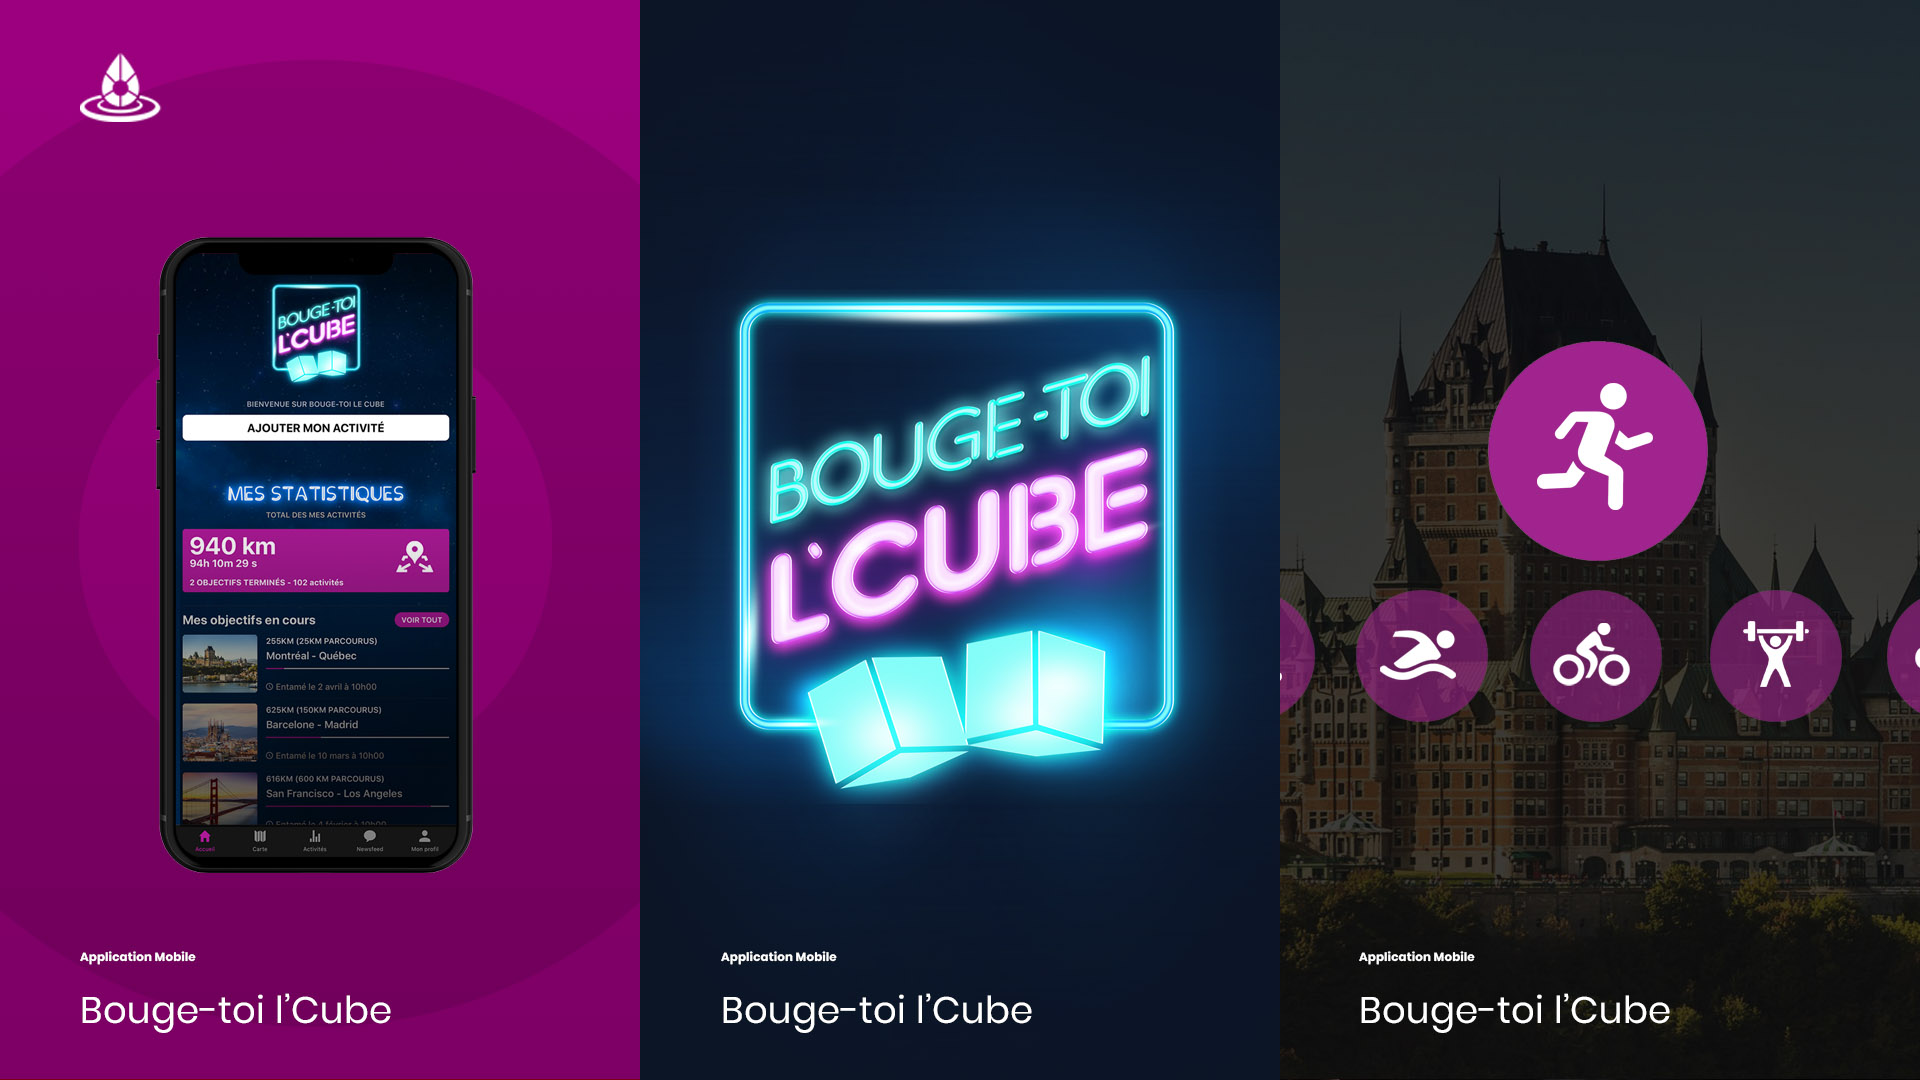 Bouge-toi l'Cube